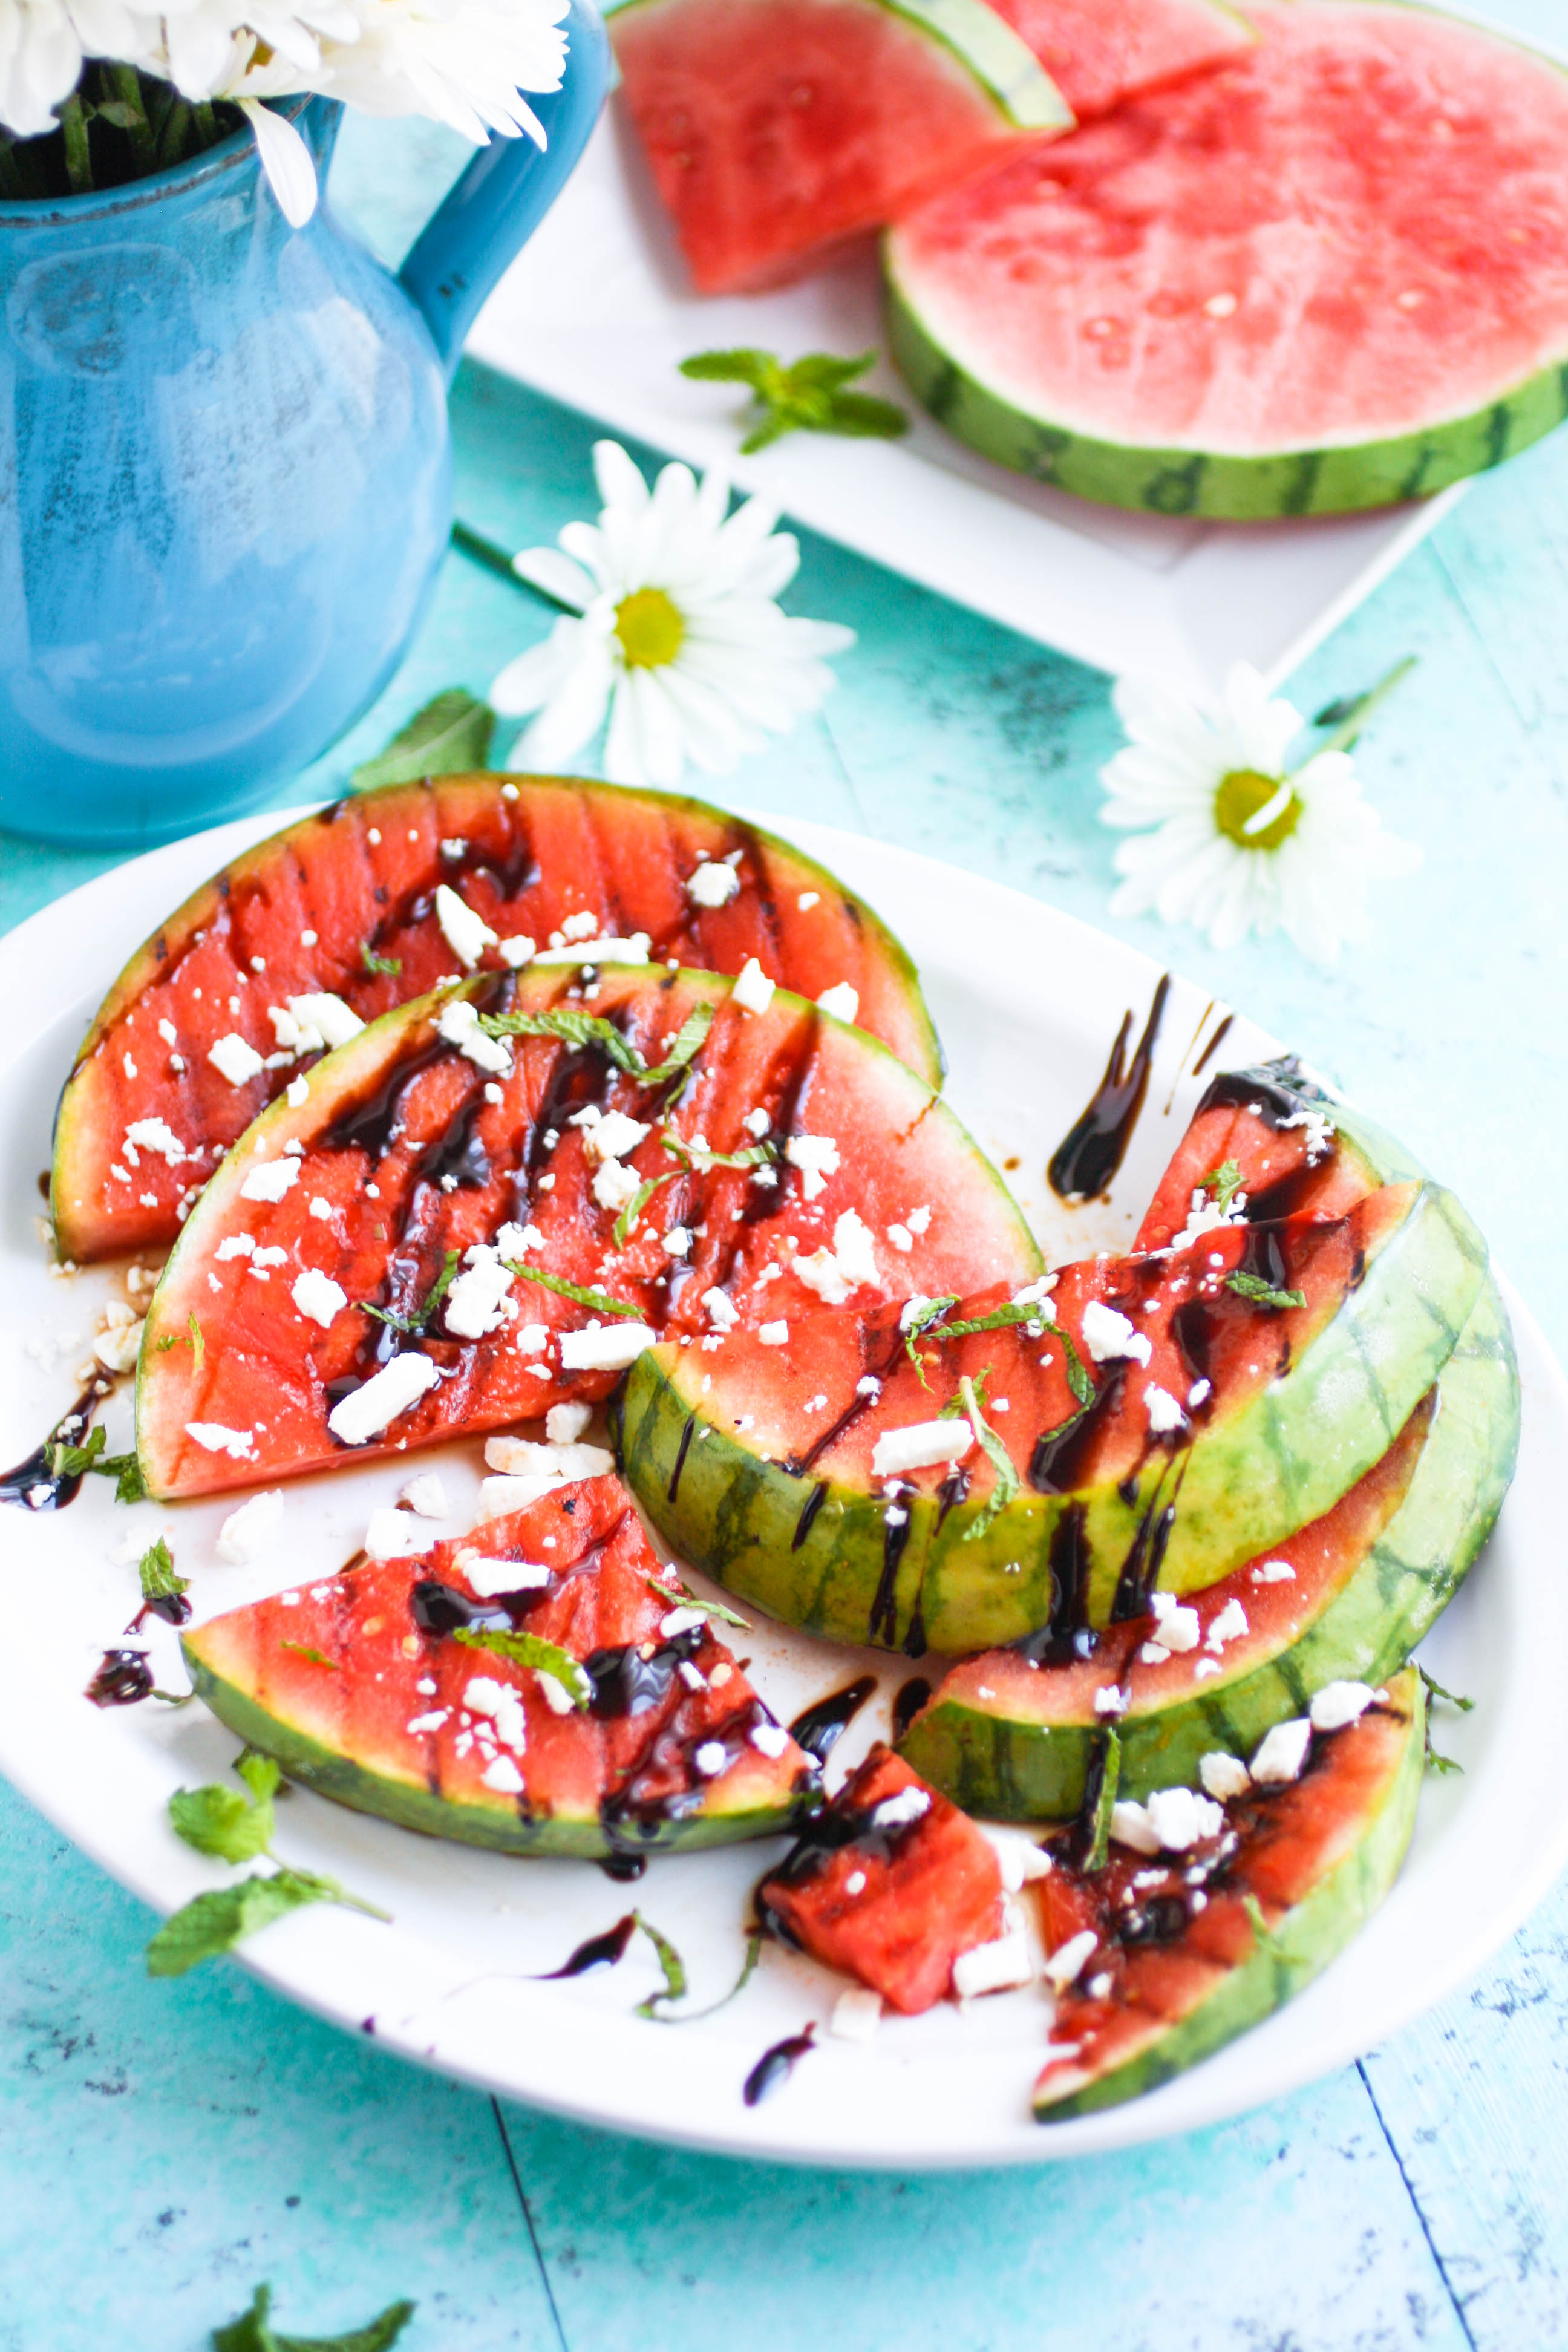 Grilled Watermelon with Feta, Mint, and Balsamic Glaze makes a fresh and fruity appetizer. Grilled Watermelon with Feta, Mint, and Balsamic Glaze is a fun appetizer to make this summer.